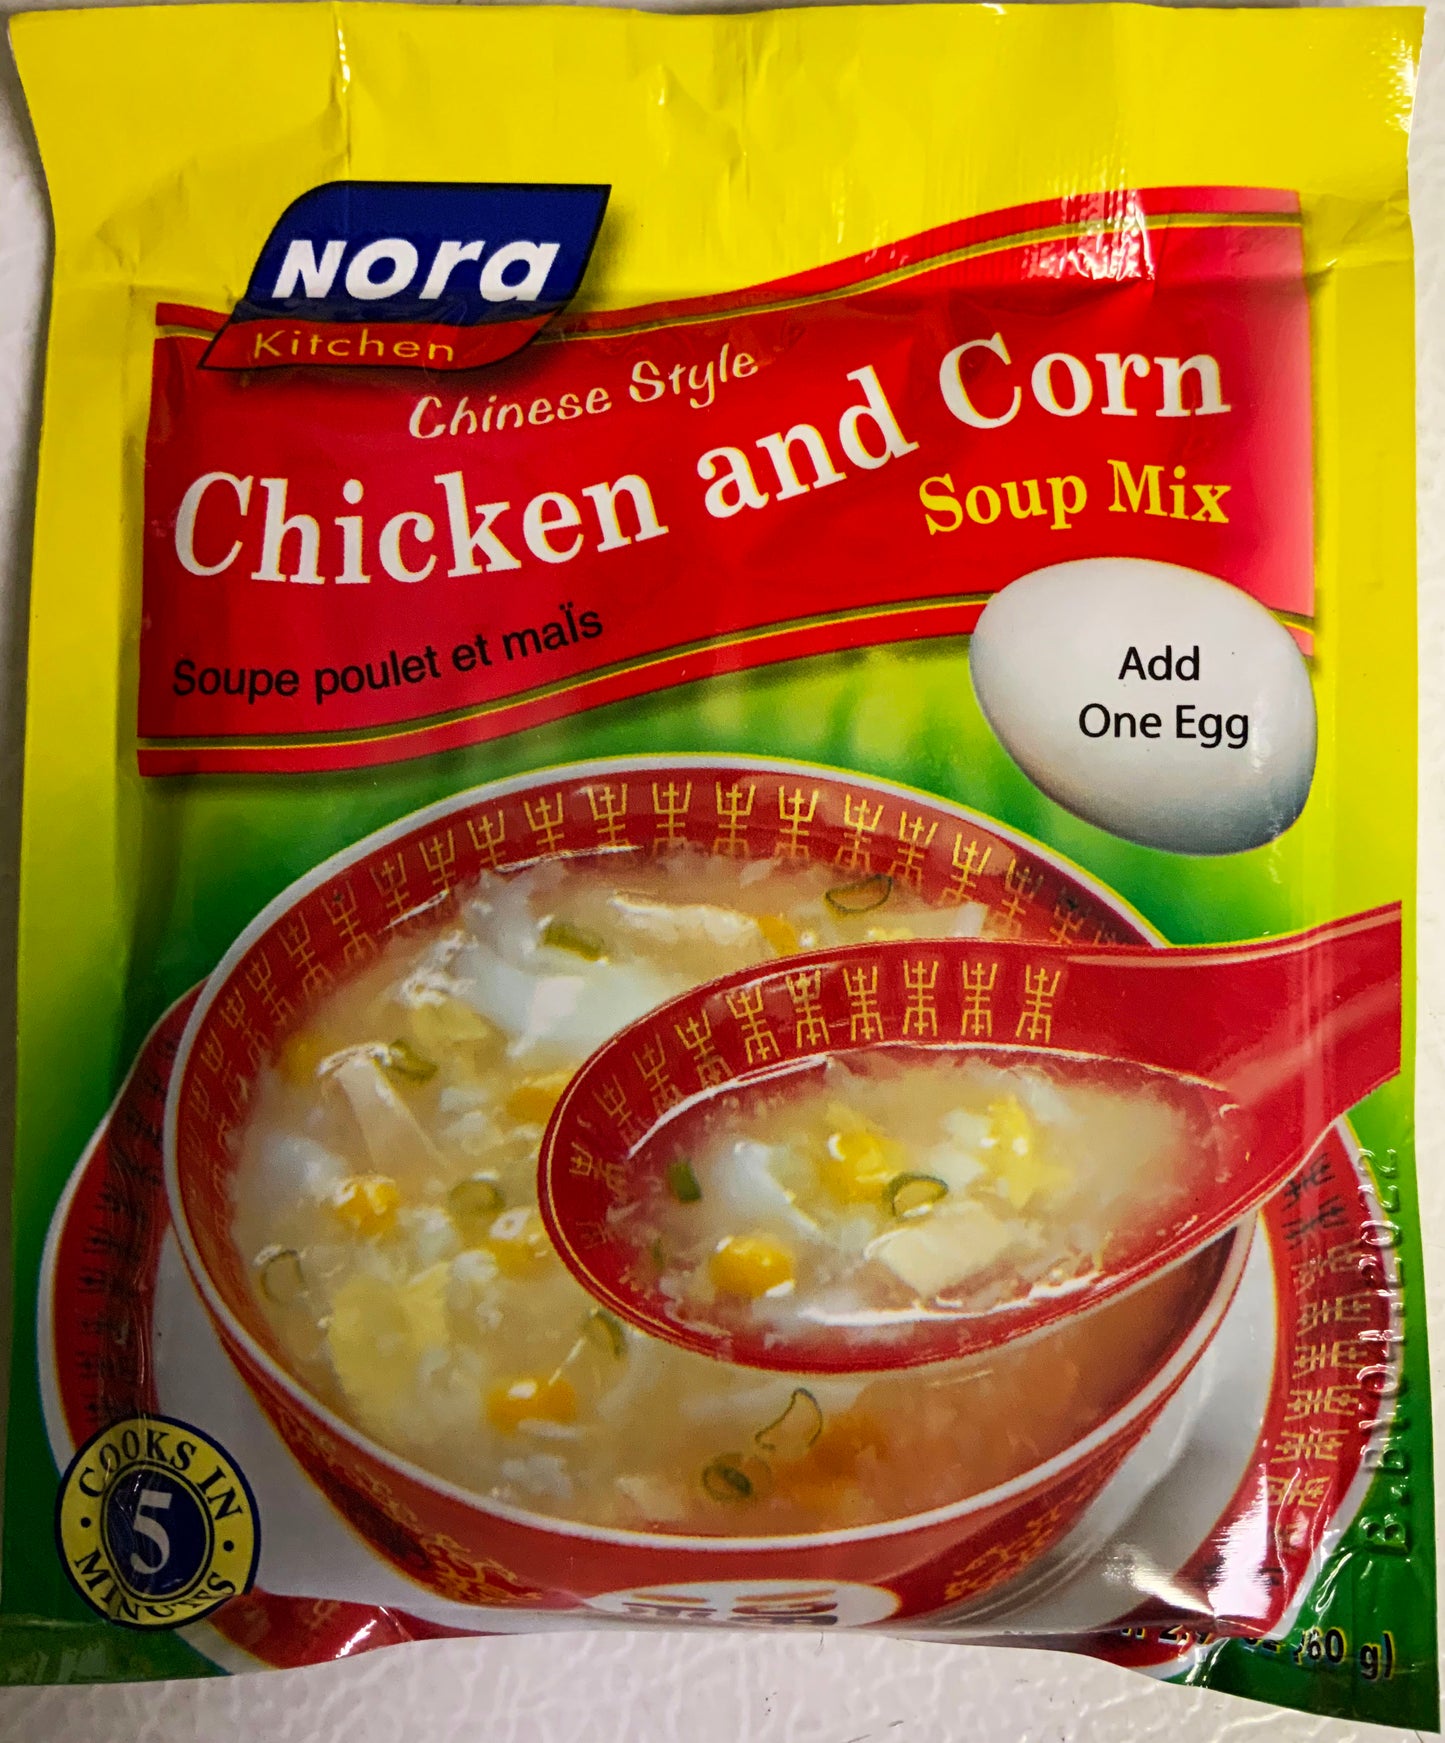 Nora Kitchen Chinese Chicken and Corn Soup Mix - 2.12 oz